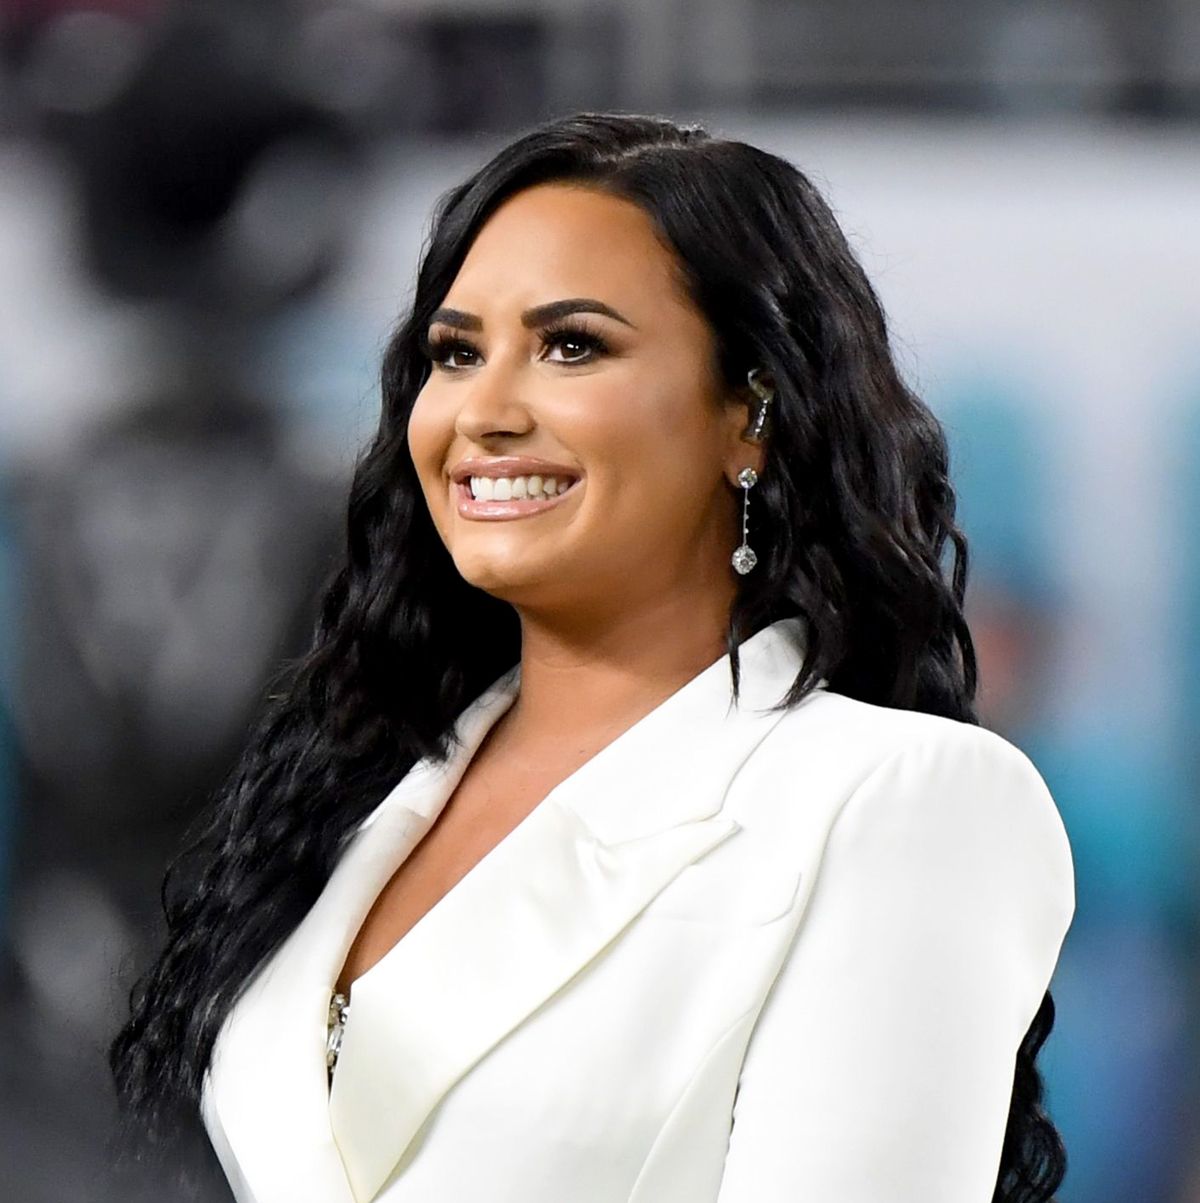 Demi Lovato Opens Up About Her Sexuality After Max Ehrich Split